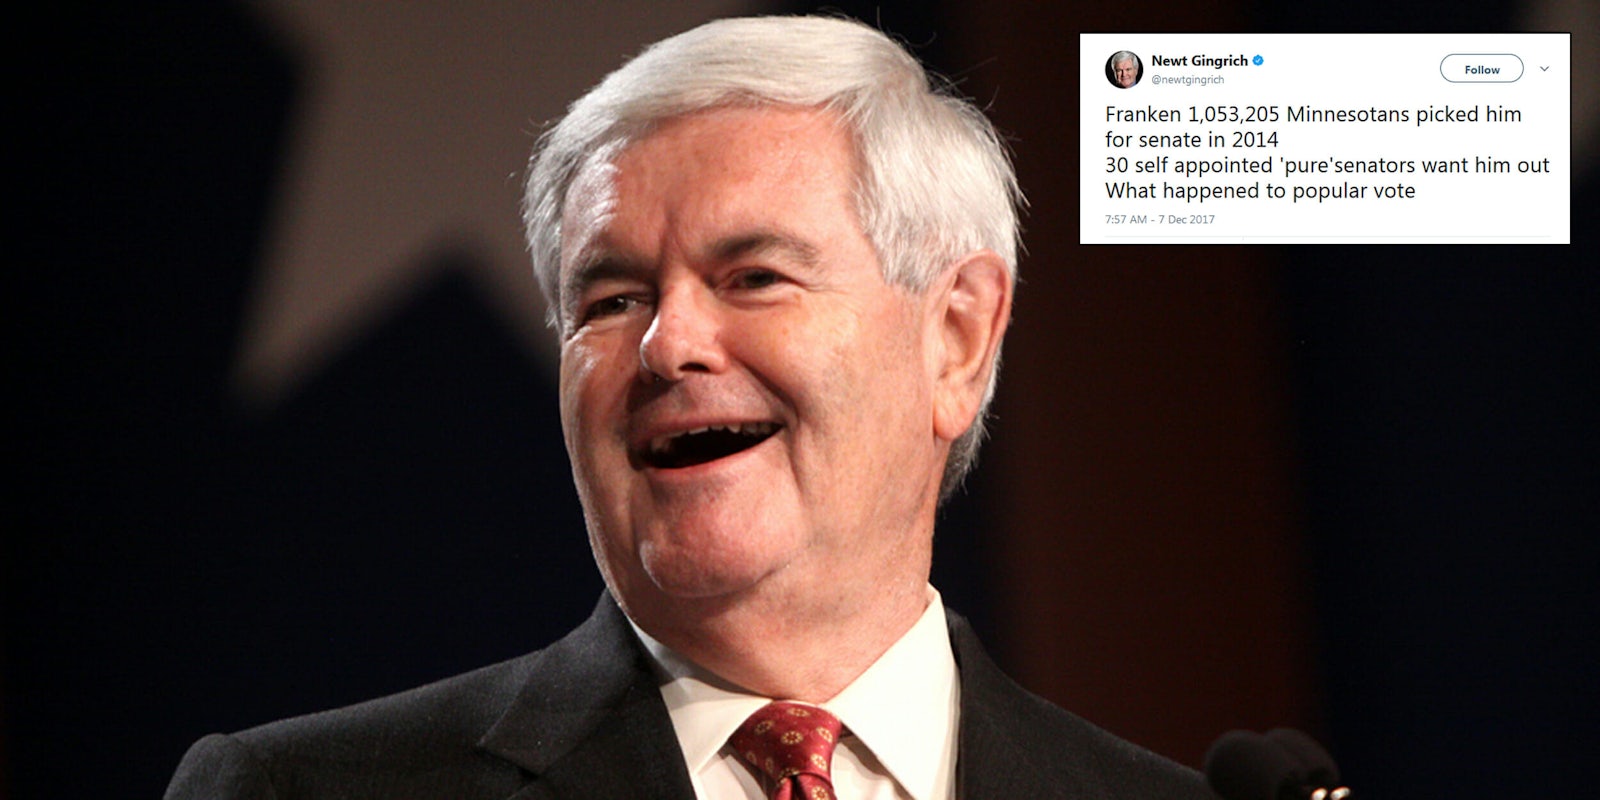 Newt Gingrich tweeted about Sen. Al Franken and the 'popular vote' prevailing on Thursday morning and people didn't know where to start with criticizing it.